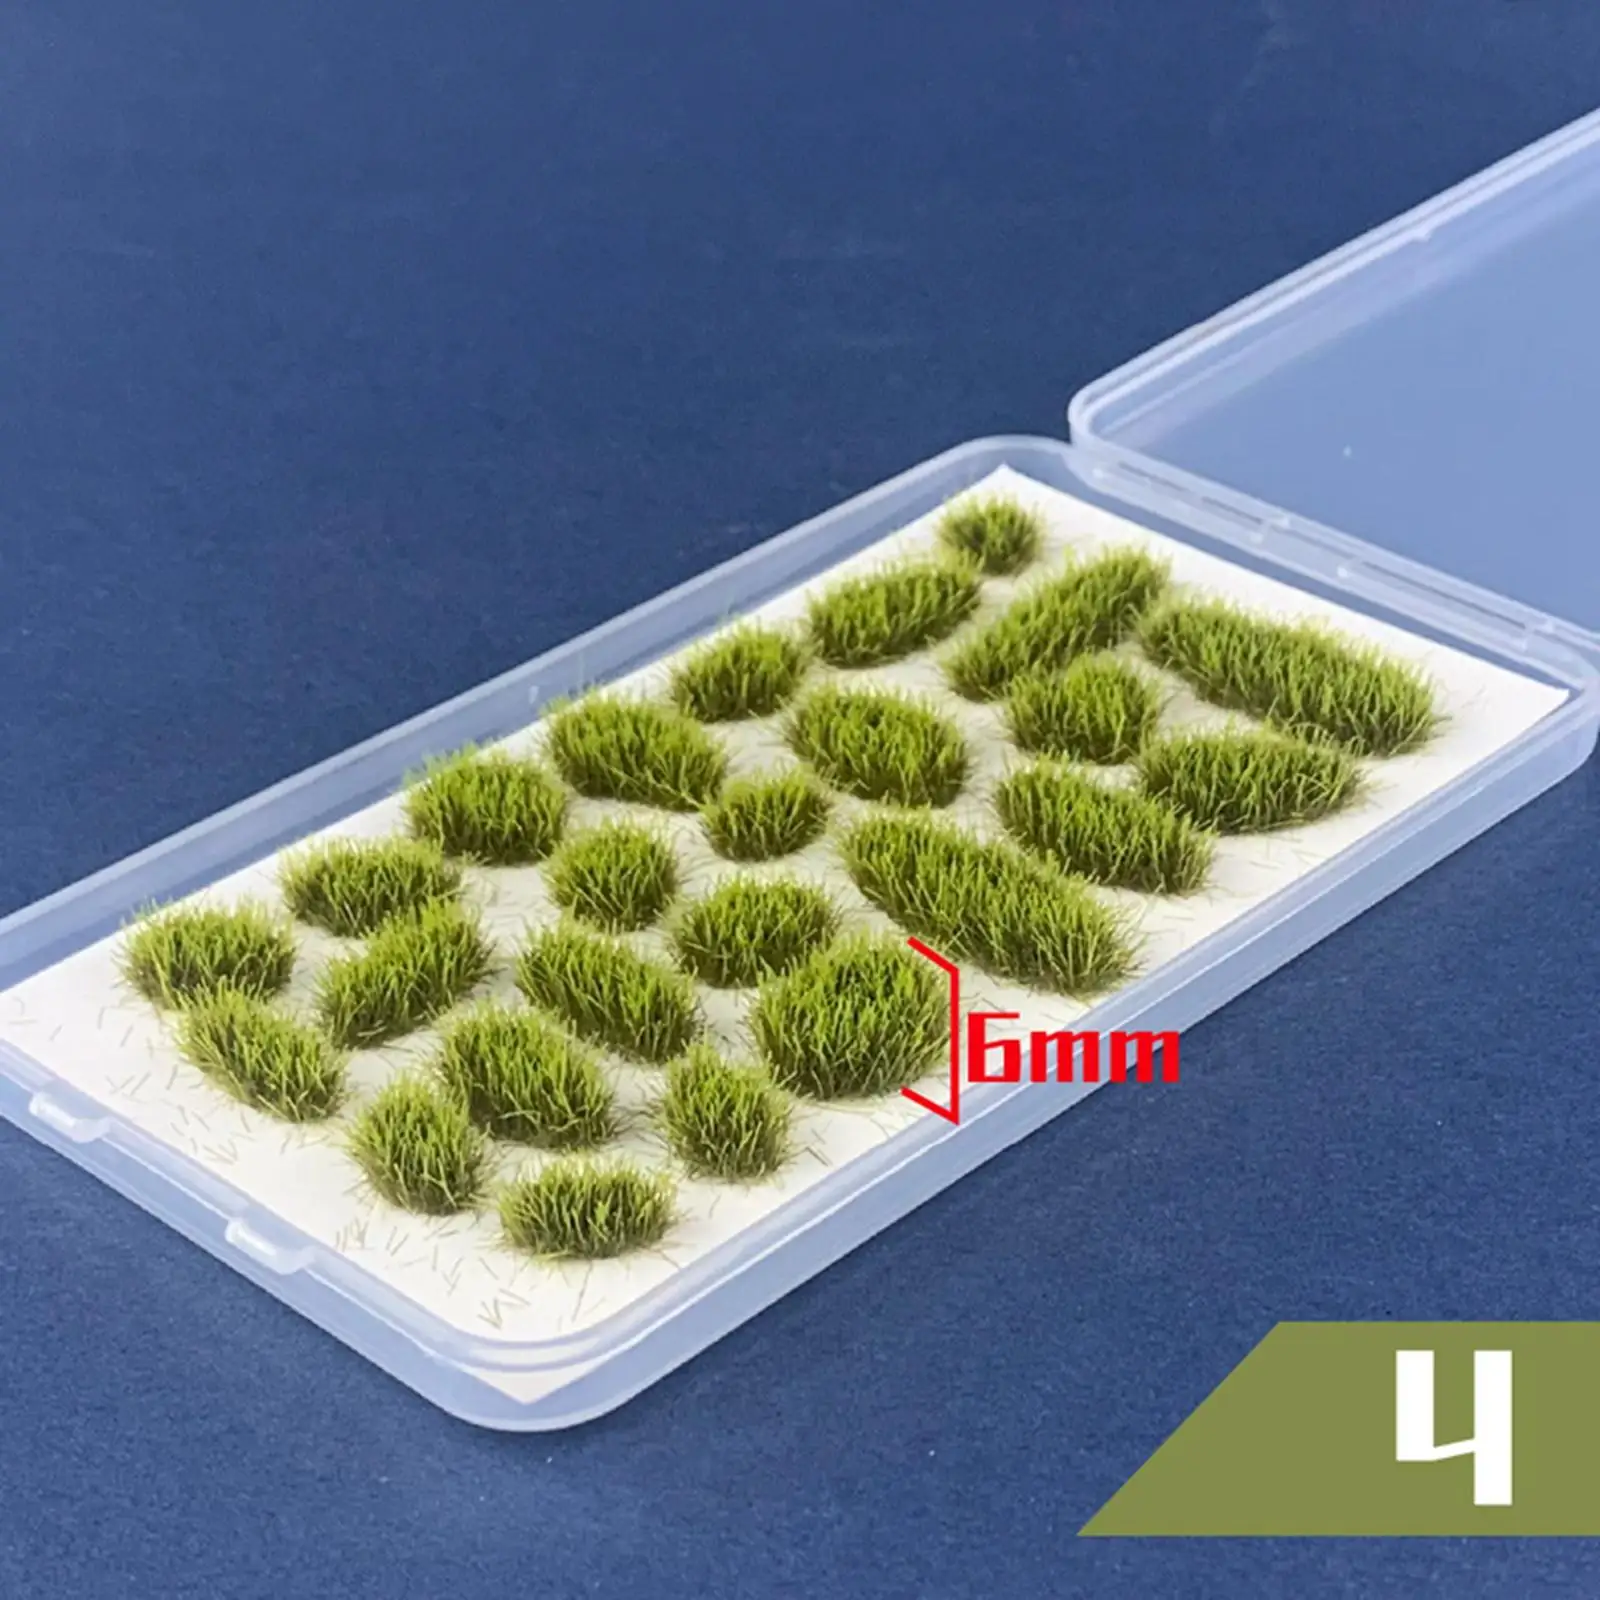 25x Cluster Grass Dioramas Scenery Decor Cluster Model for Garden Scenery Landscape Dioramas Scenery DIY Landscape Layout